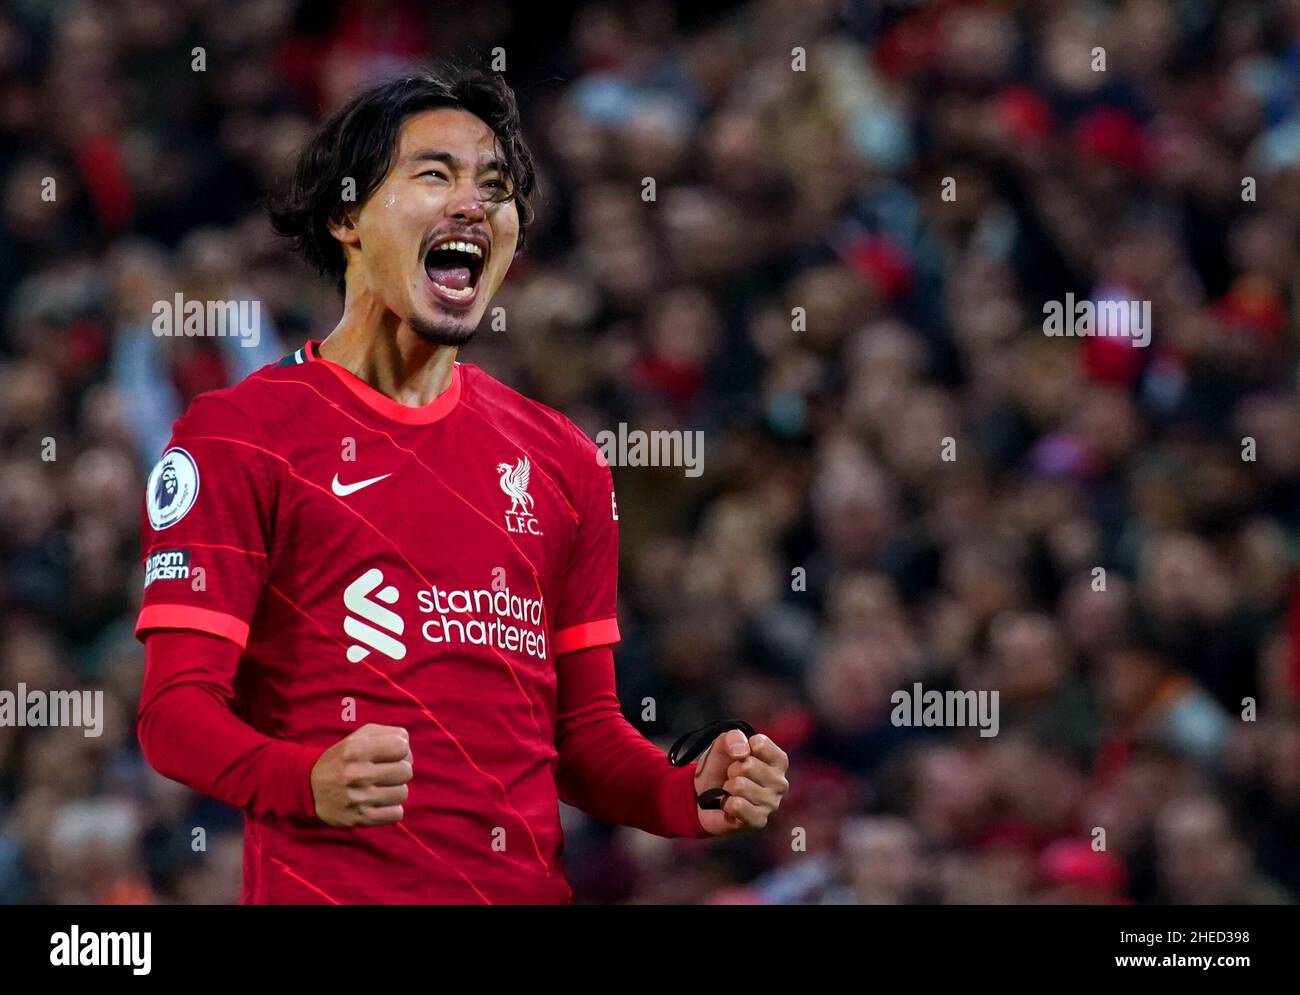 File photo dated 20-11-2021 of Liverpool's Takumi Minamino celebrates scoring their side's fourth goal of the game during the Premier League match at Anfield, Liverpool. Liverpool manager Jurgen Klopp admits they 'desperately' need forward Takumi Minamino to stay fit to cover for the absences of Mohamed Salah and Sadio Mane. Issue date: Monday January 10, 2022. Stock Photo